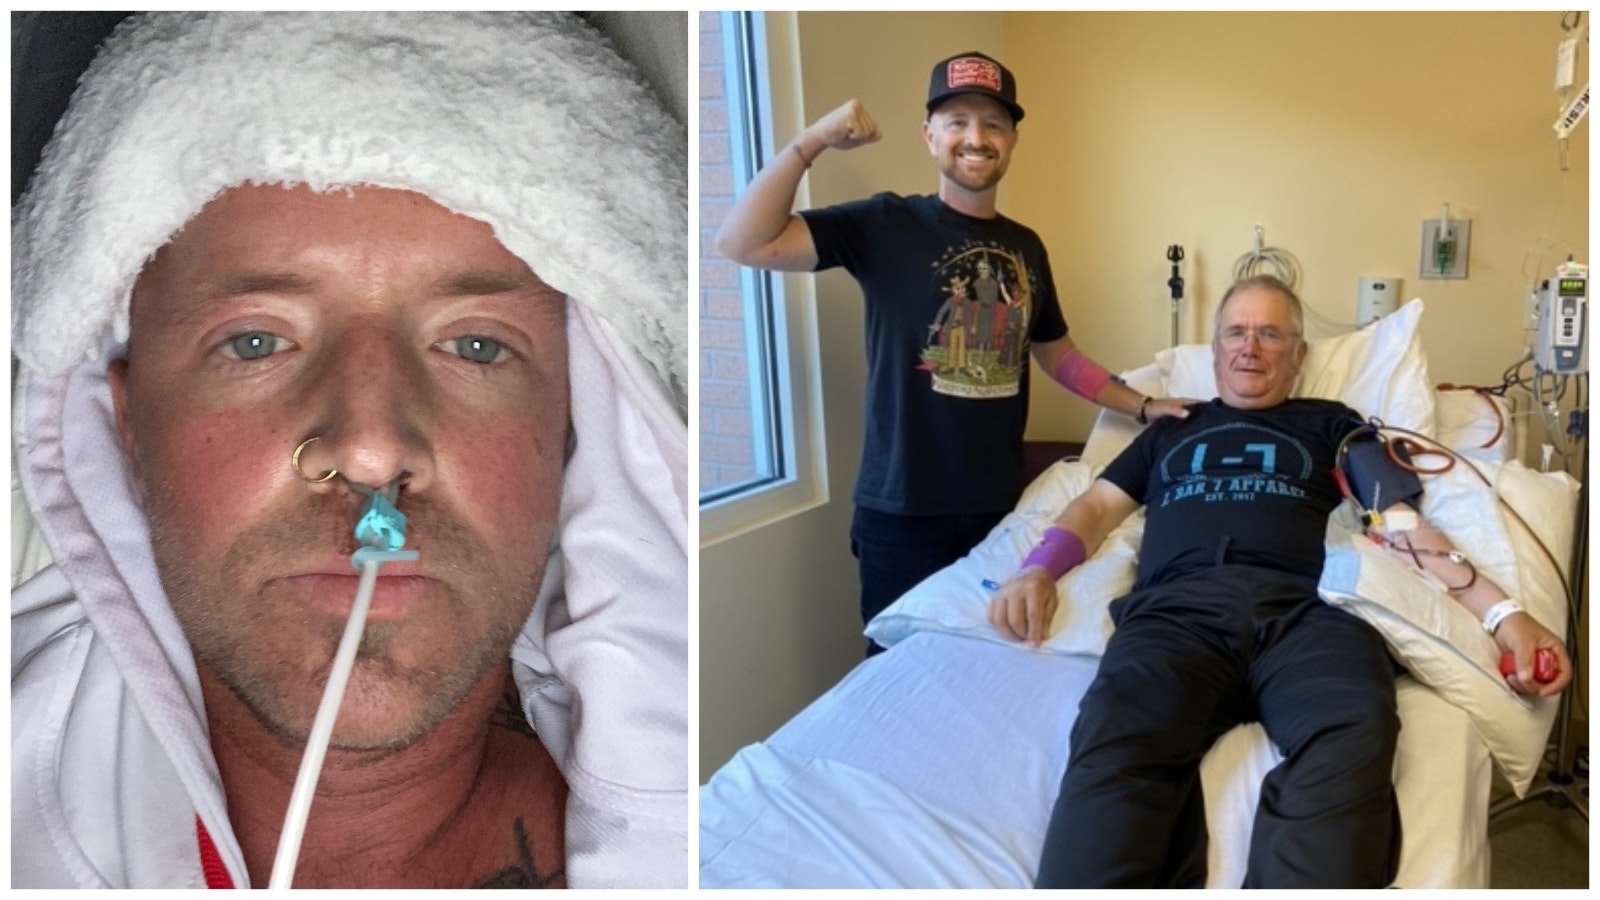 Left: Photo Nathan Kissack took of himself while fighting off graft versus host syndrome. Kissack had a 106-degree fever told Cowboy State Daily he could barely hold his phone. He  took the picture to remind himself, if he survived, that if this doesn't kill him, then nothing else can kill him. Right: Nathan Kissack, at left, poses with his dad Bart, who is donating his stem cells to his son.